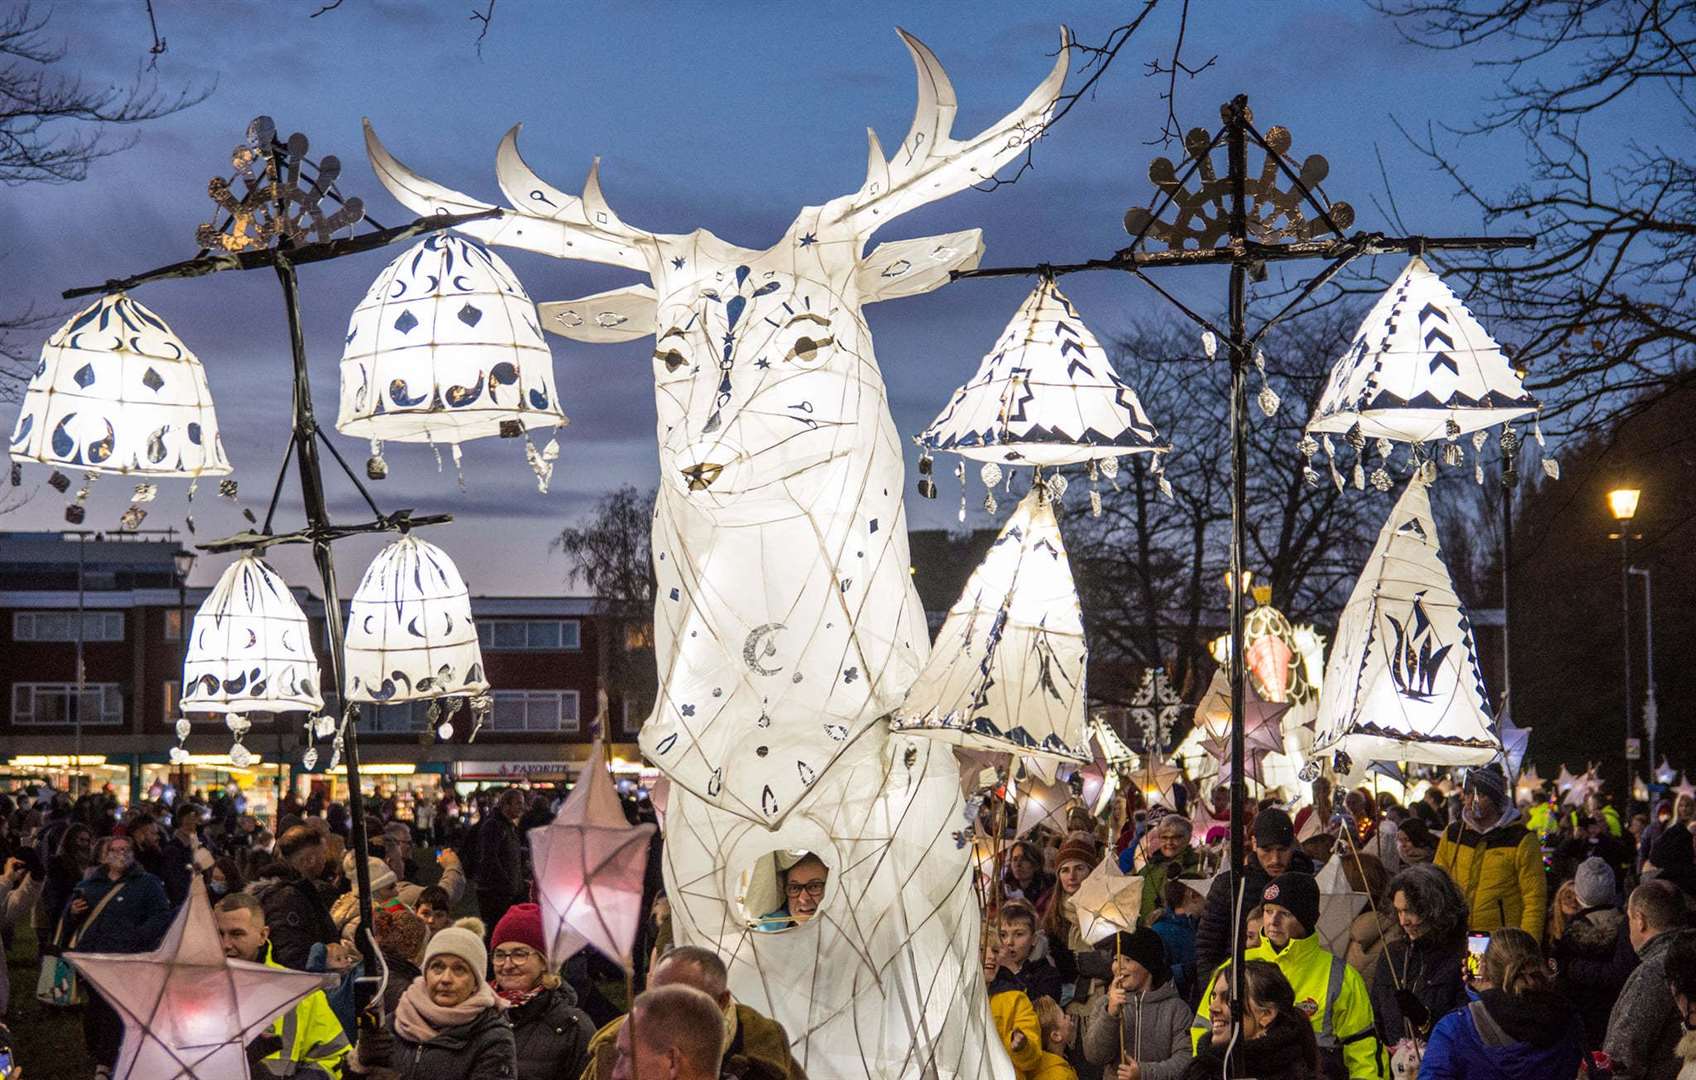 The lantern parade with the deer figure. Picture: Brian van der Veen